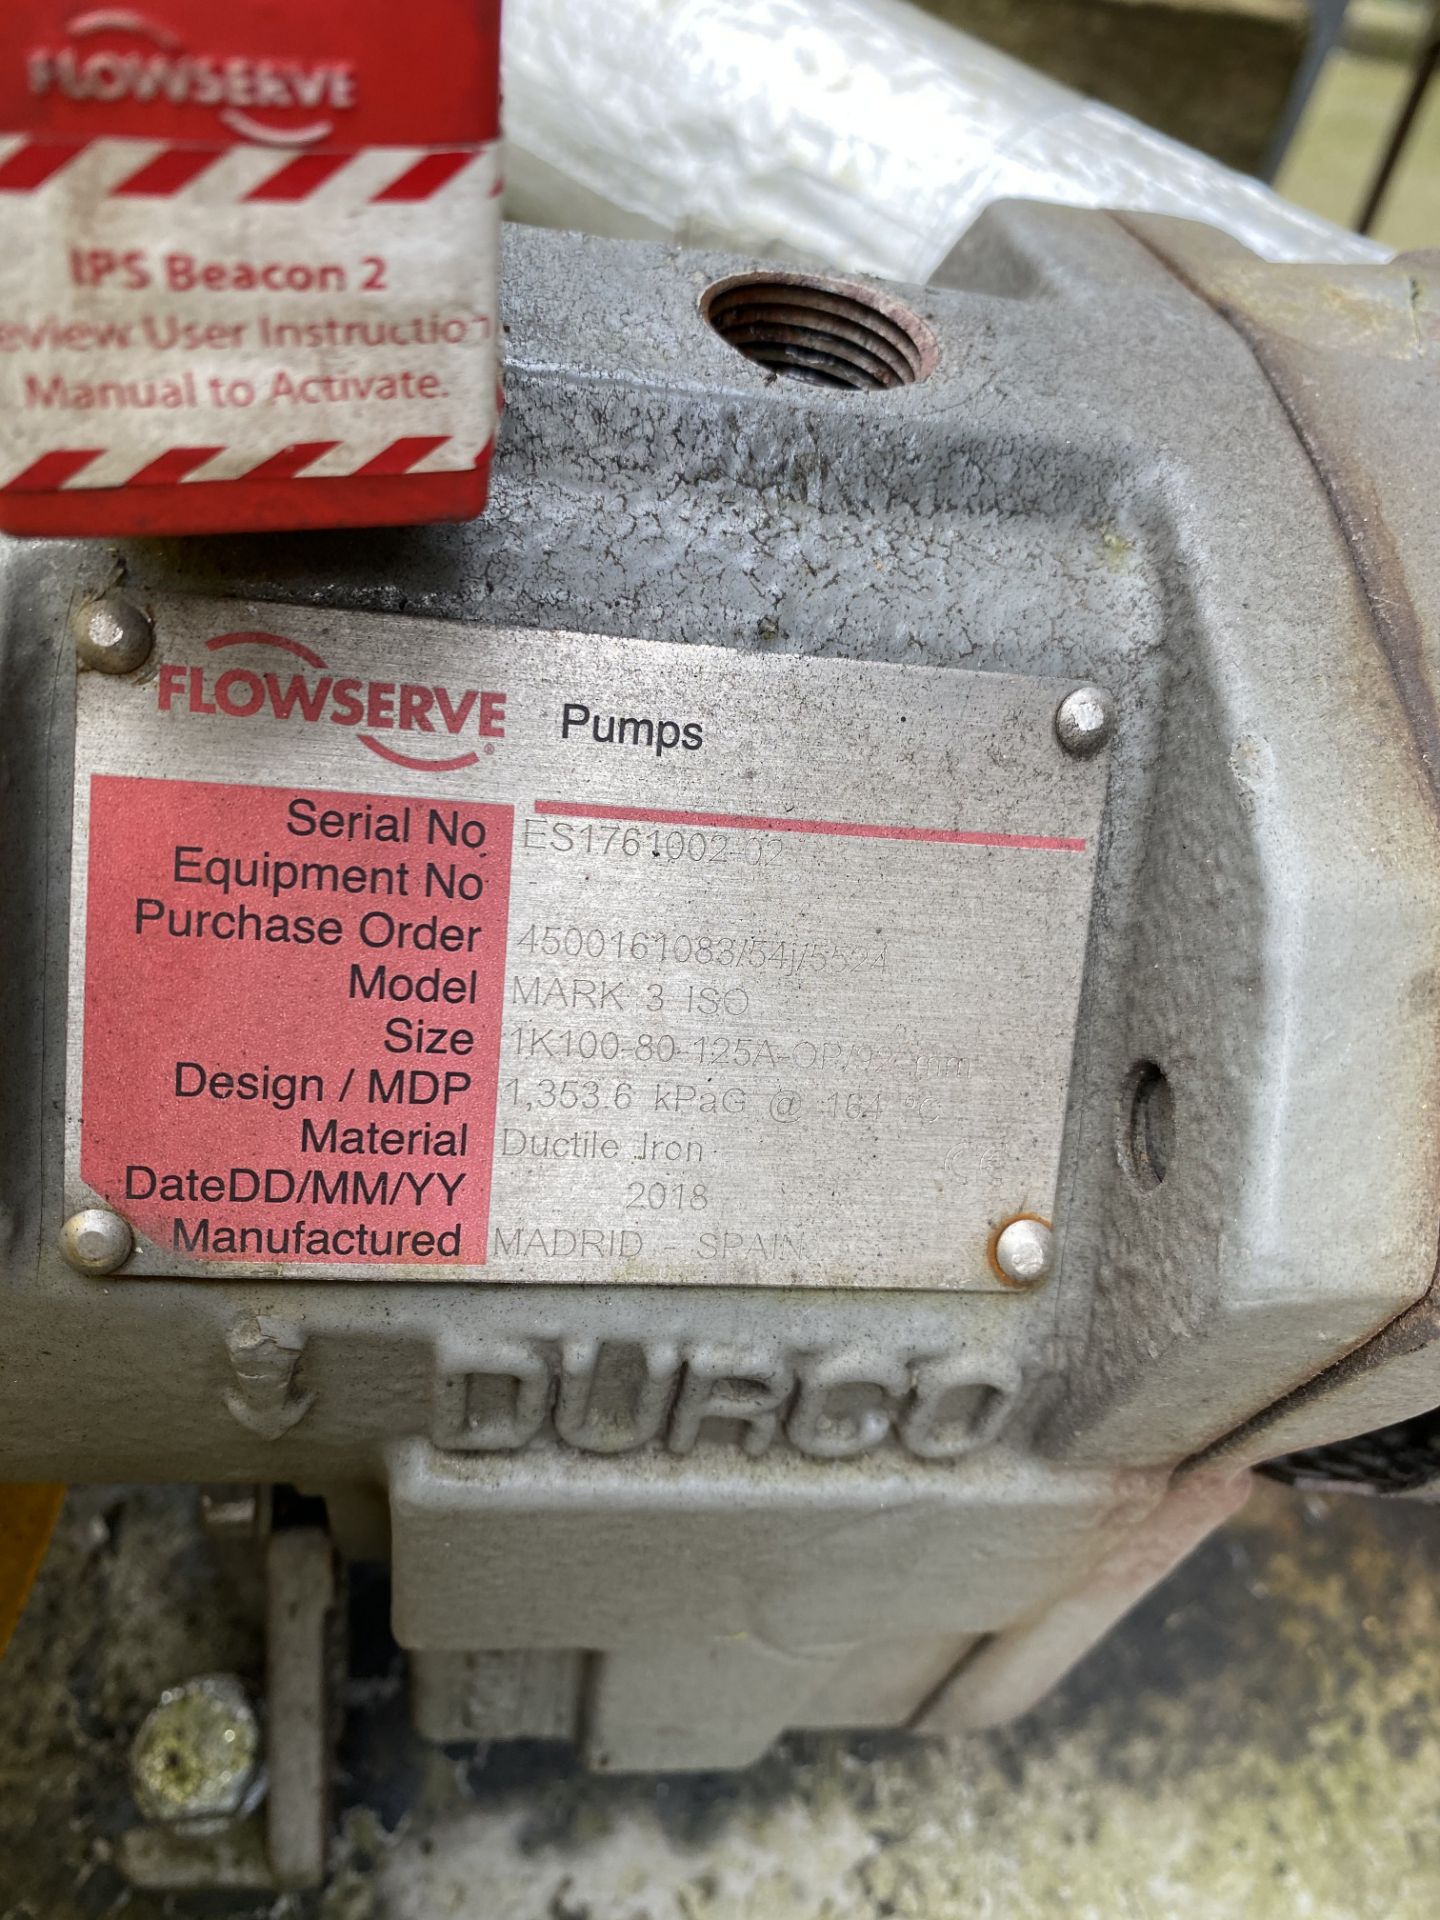 Durko Mark3 ISO 1K100-80-125A-OP/92mm Pump, serial no. ES1761002-02, year of manufacture 2018, - Image 4 of 4